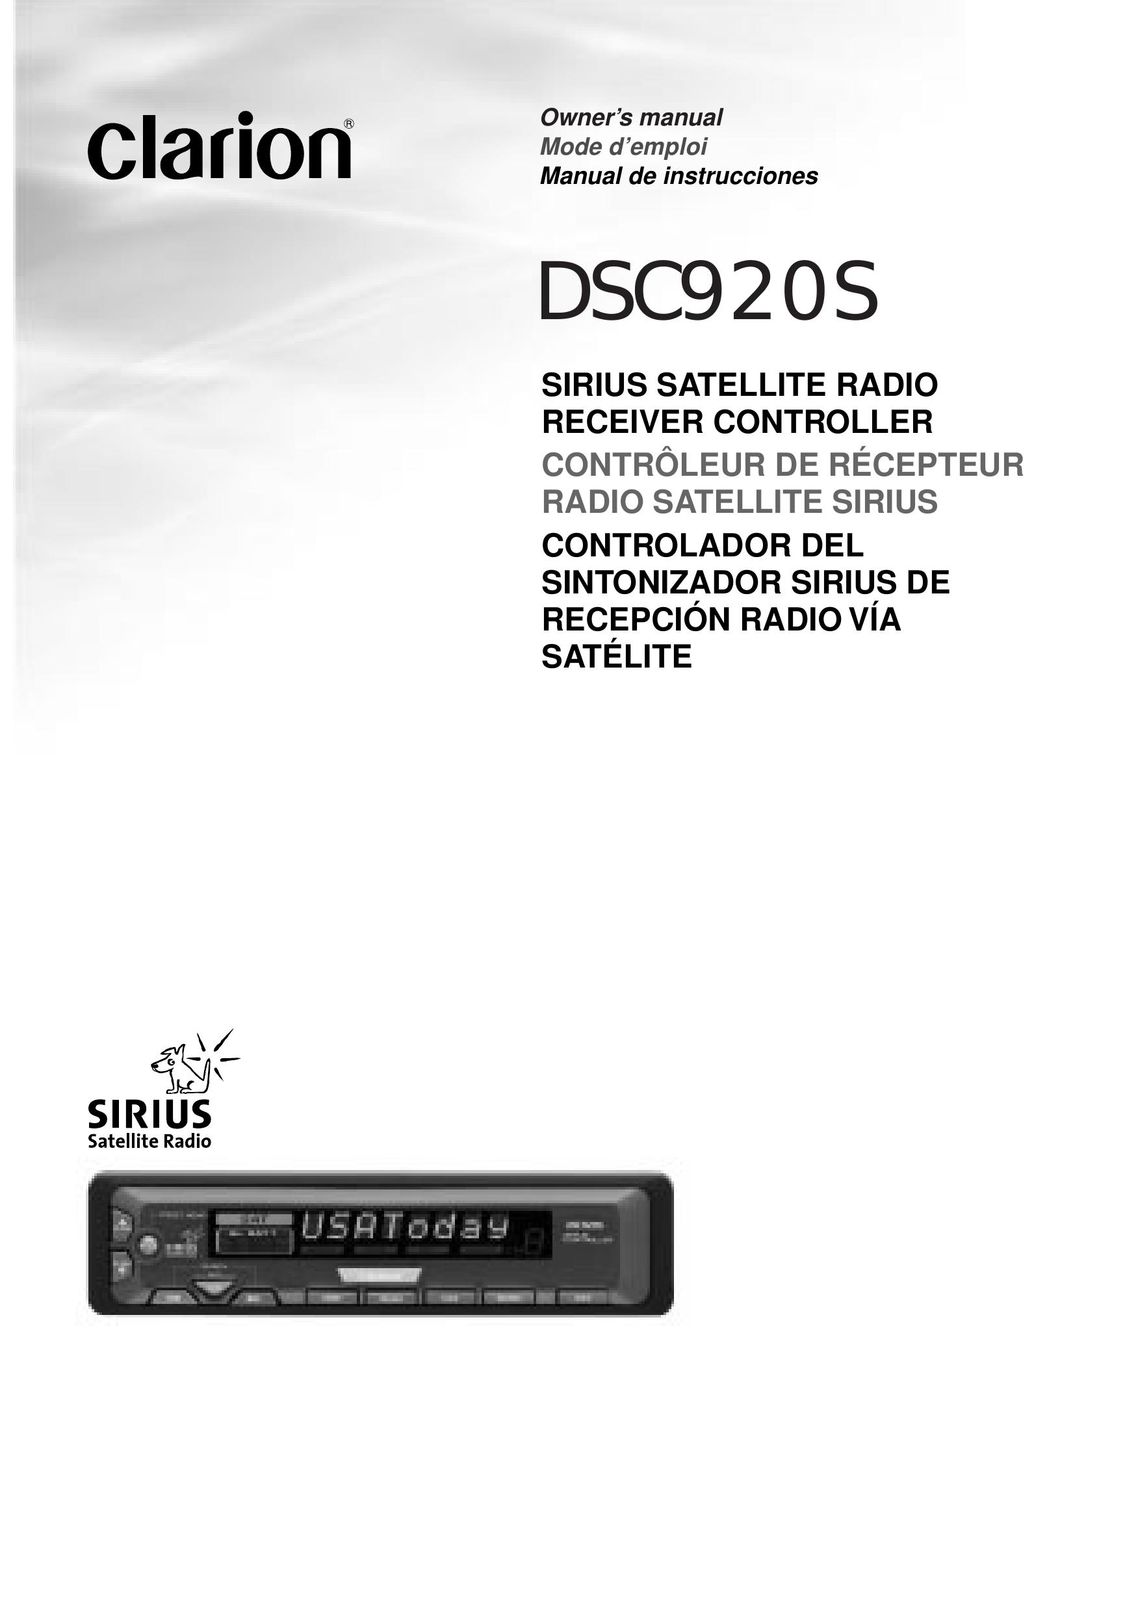 Clarion DSC920S Car Satellite Radio System User Manual (Page 1)